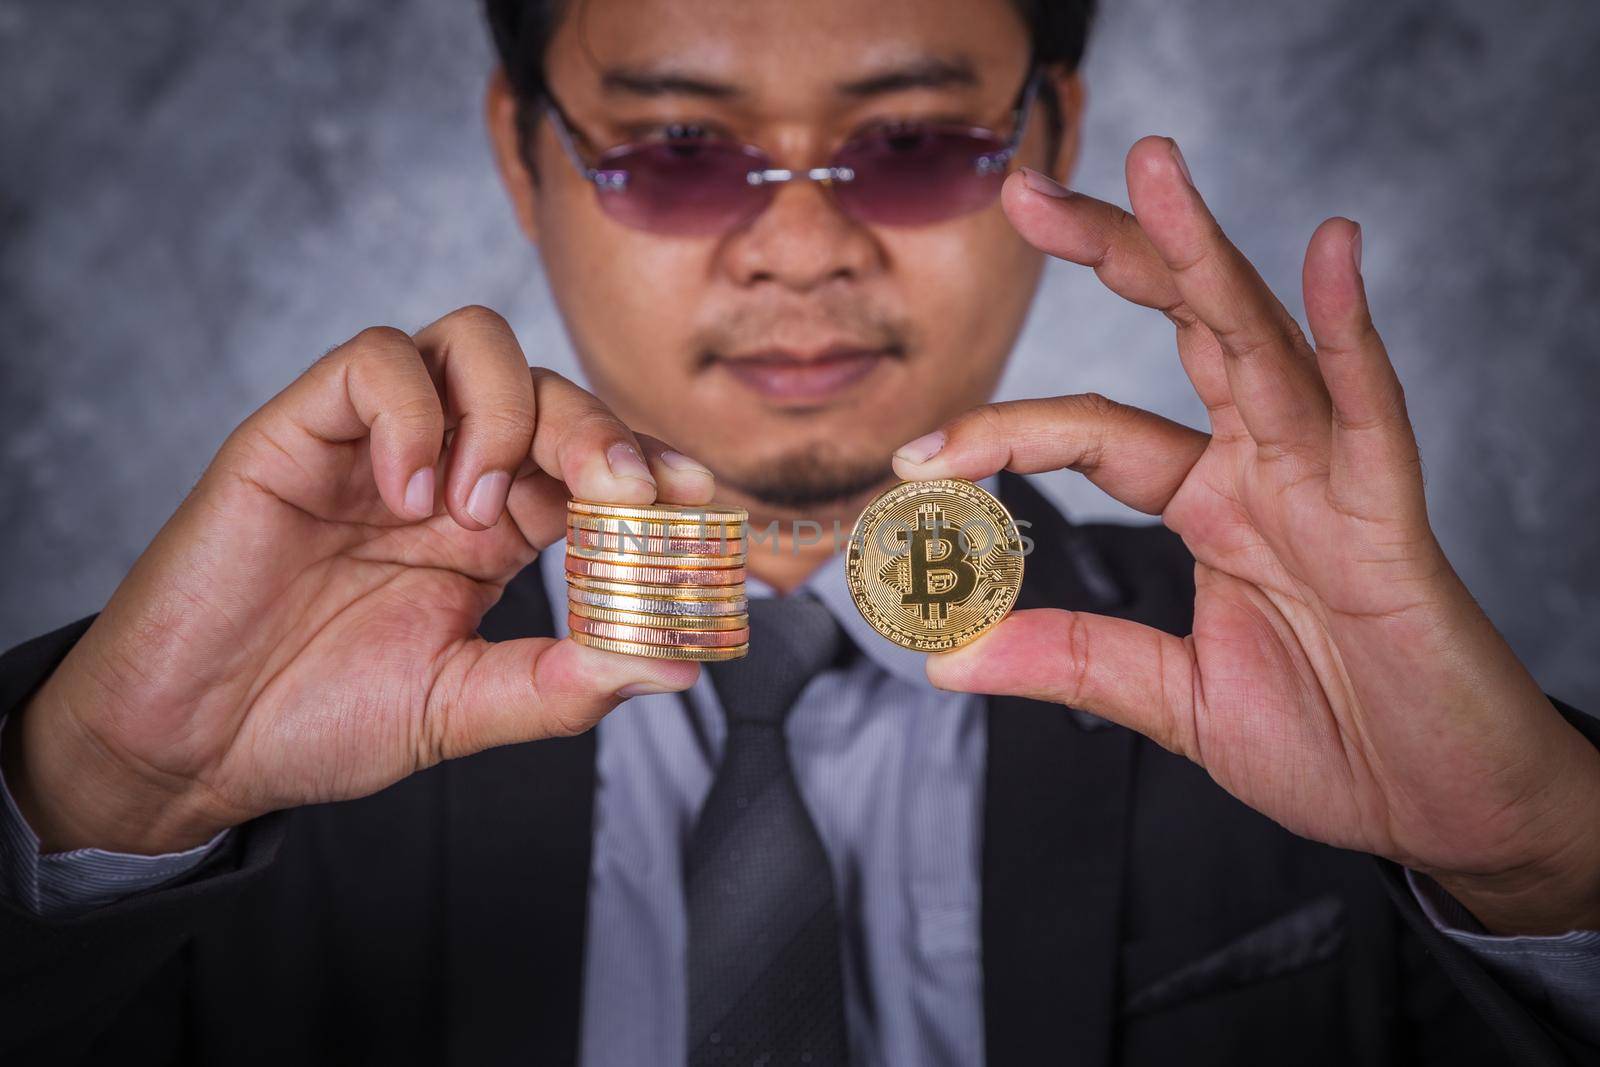 bitcoin in hand of business man with suit